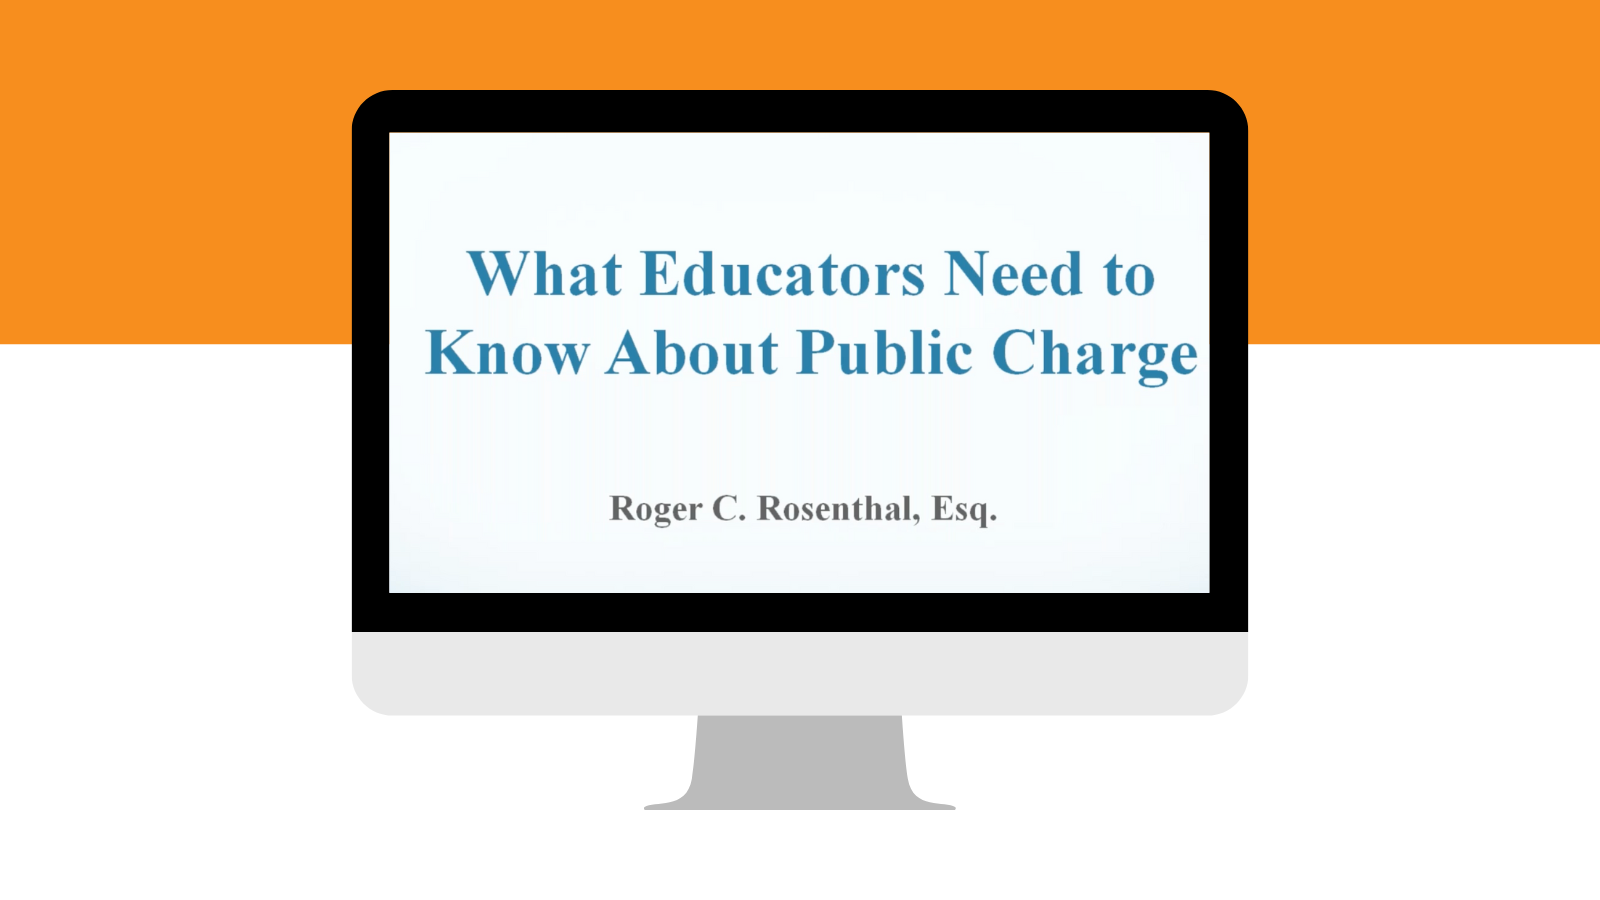 What Educators Need to Know About Public Charge